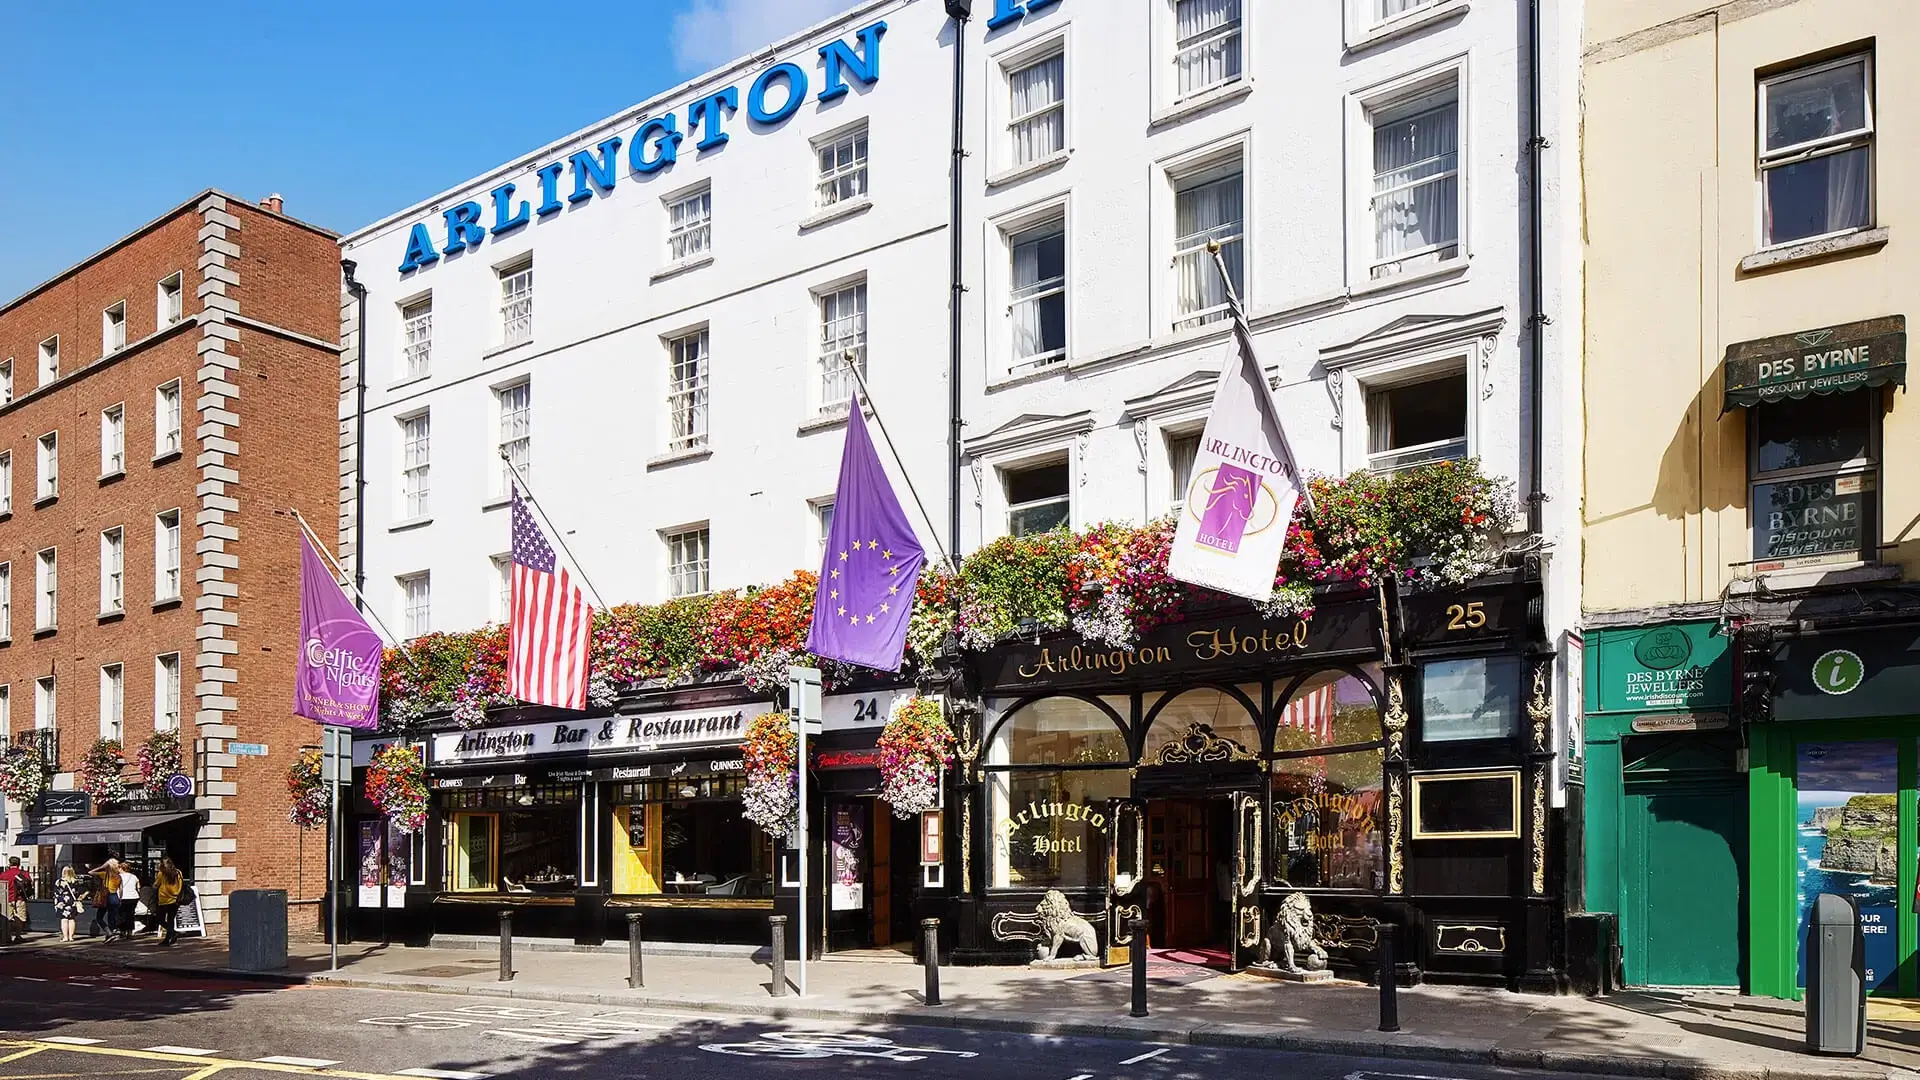 Exterior view of The Arlington Hotel which is located in the very populated Dublin city center